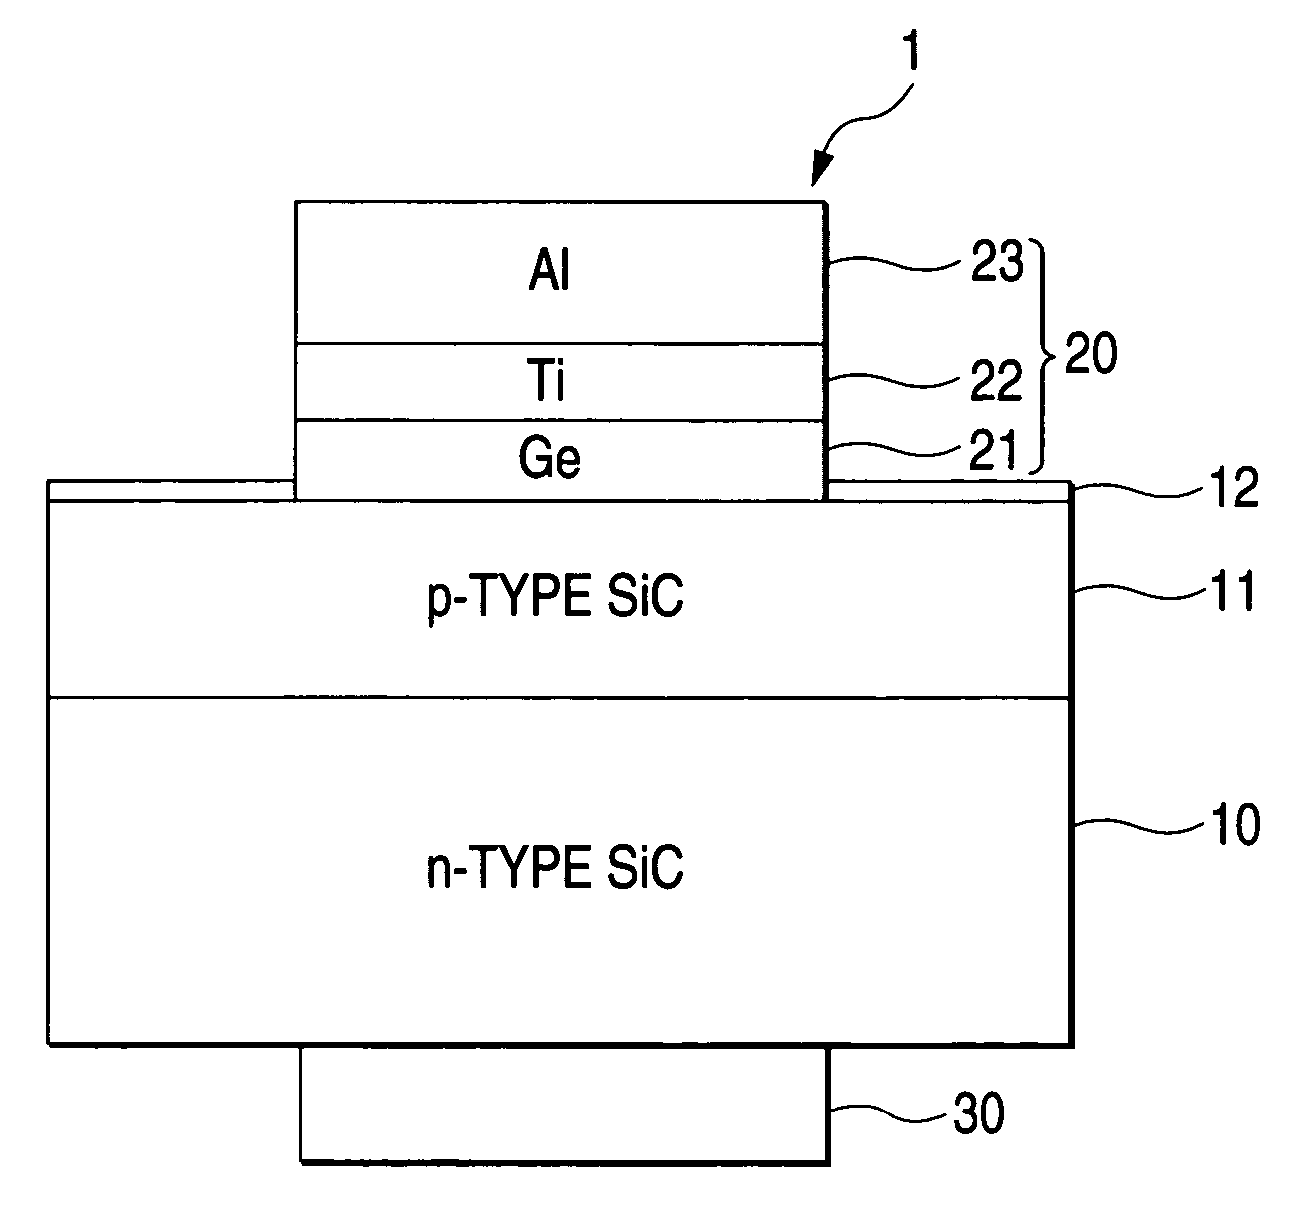 Electrode for p-type SiC